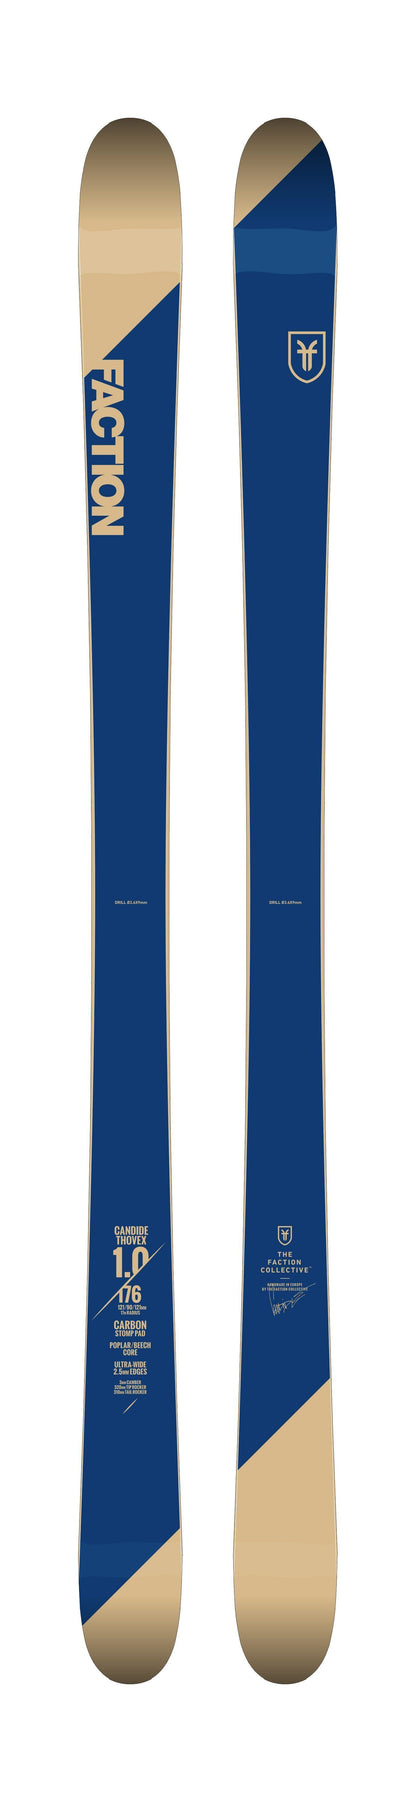 Faction Candide Thoves CT 1.0 Skis 2019